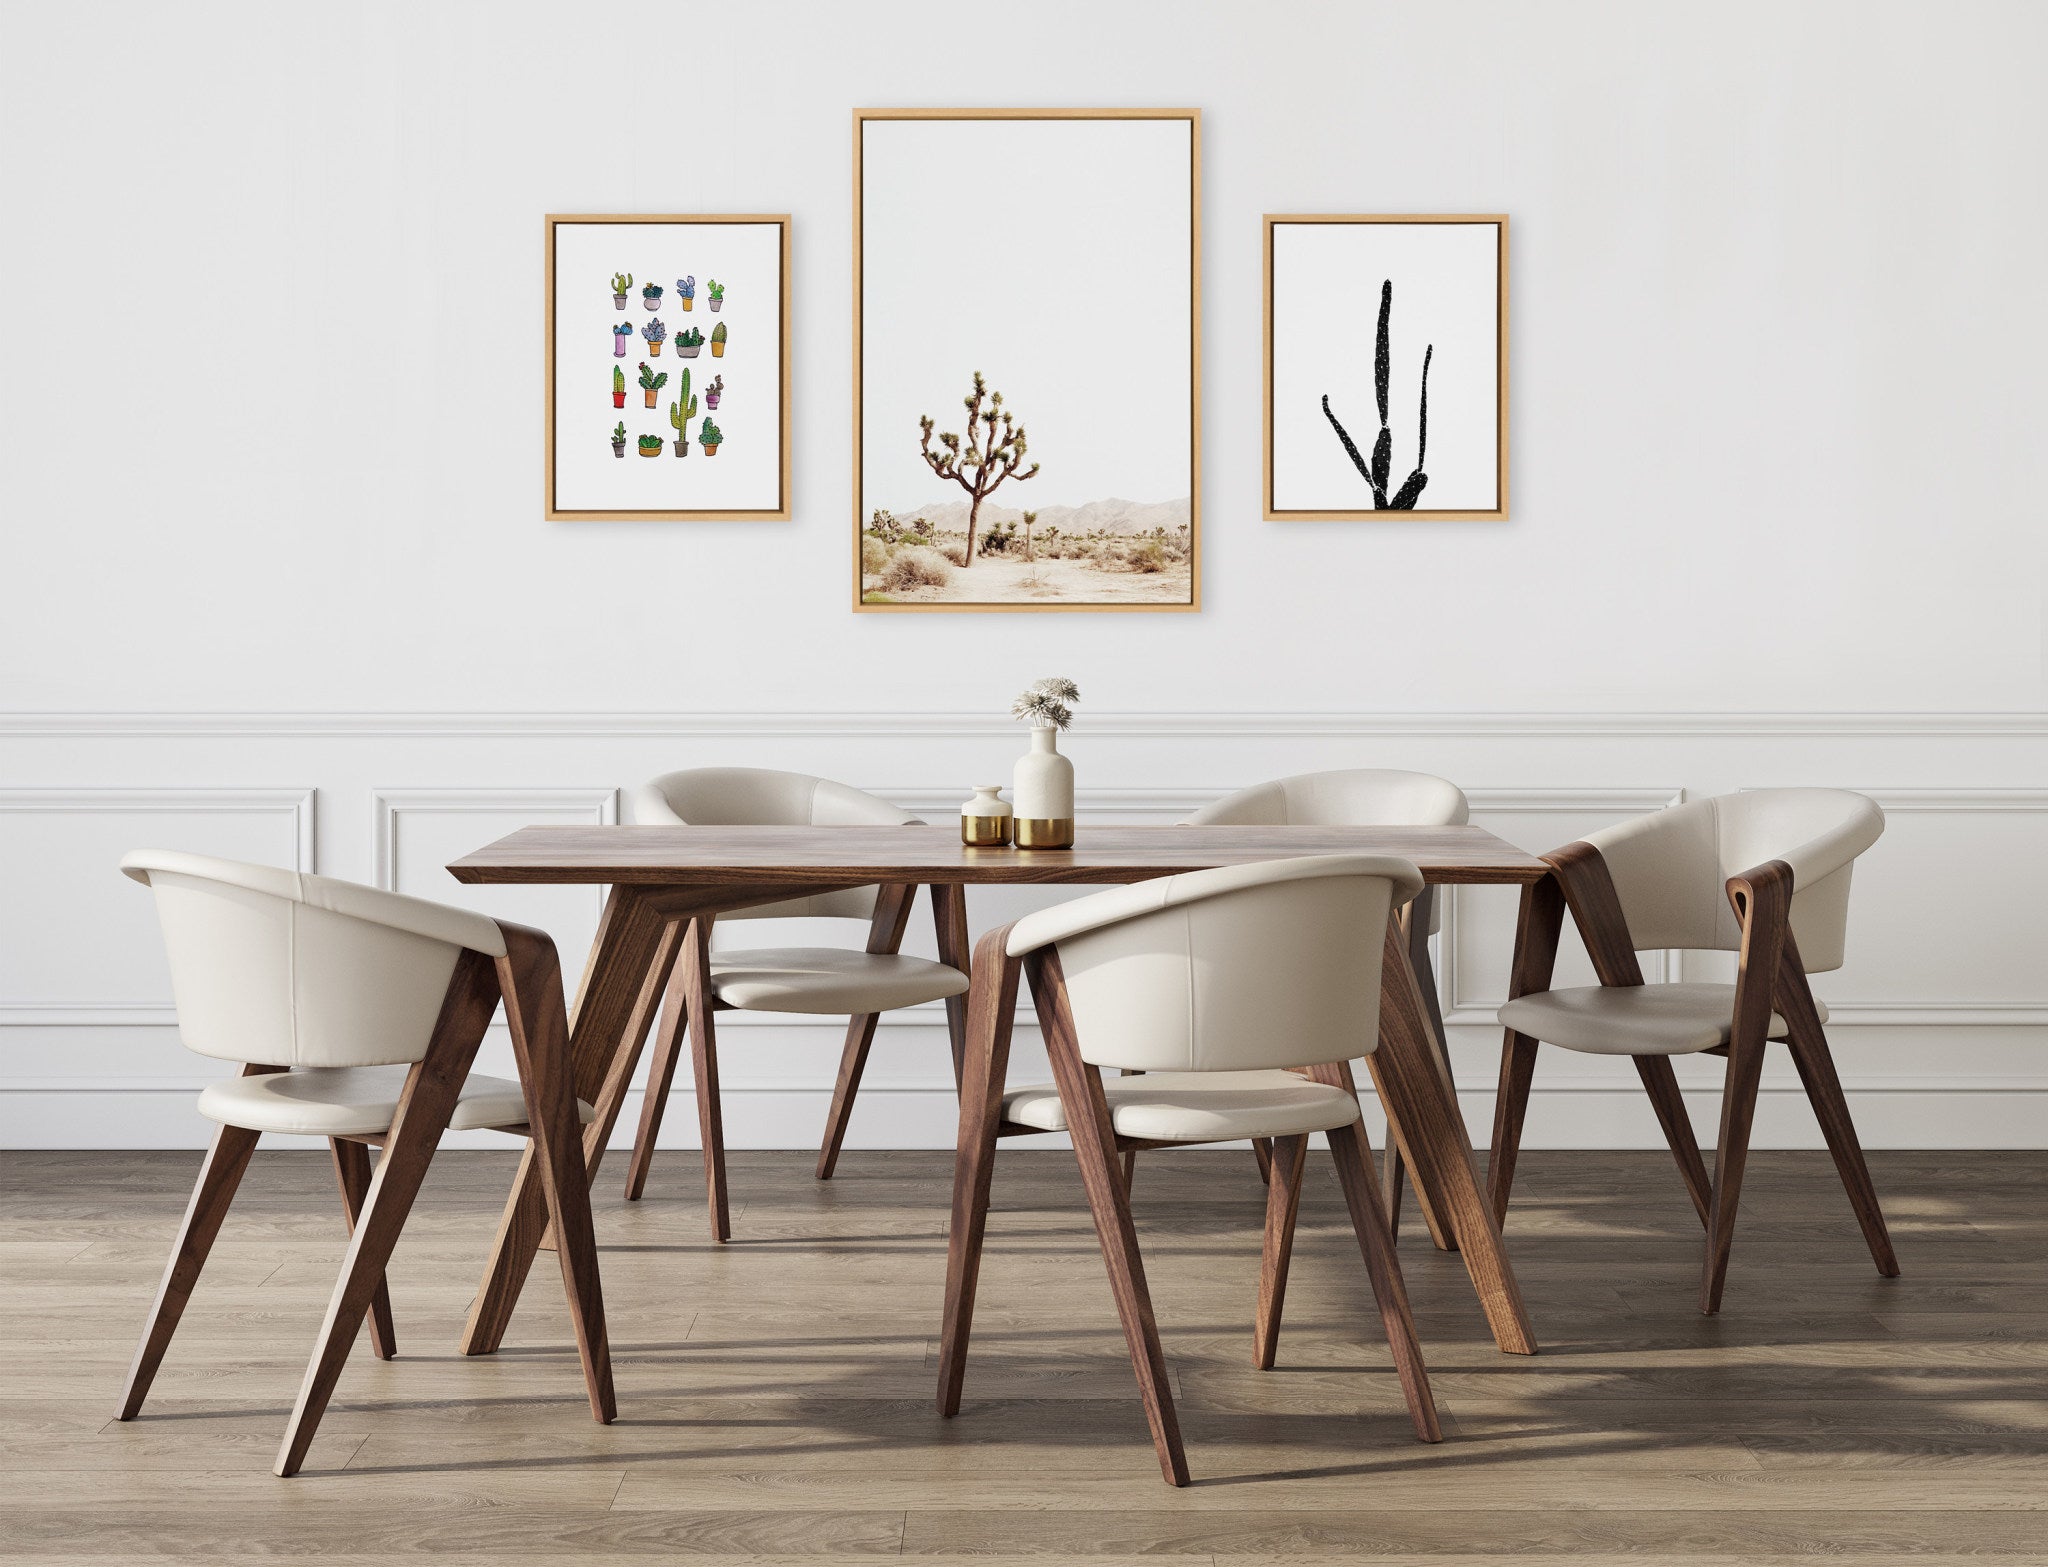 Sylvie Lone Joshua Tree, Group of Cacti and Film Grain Cactus 1 Framed Canvas Art Set by Various Artists